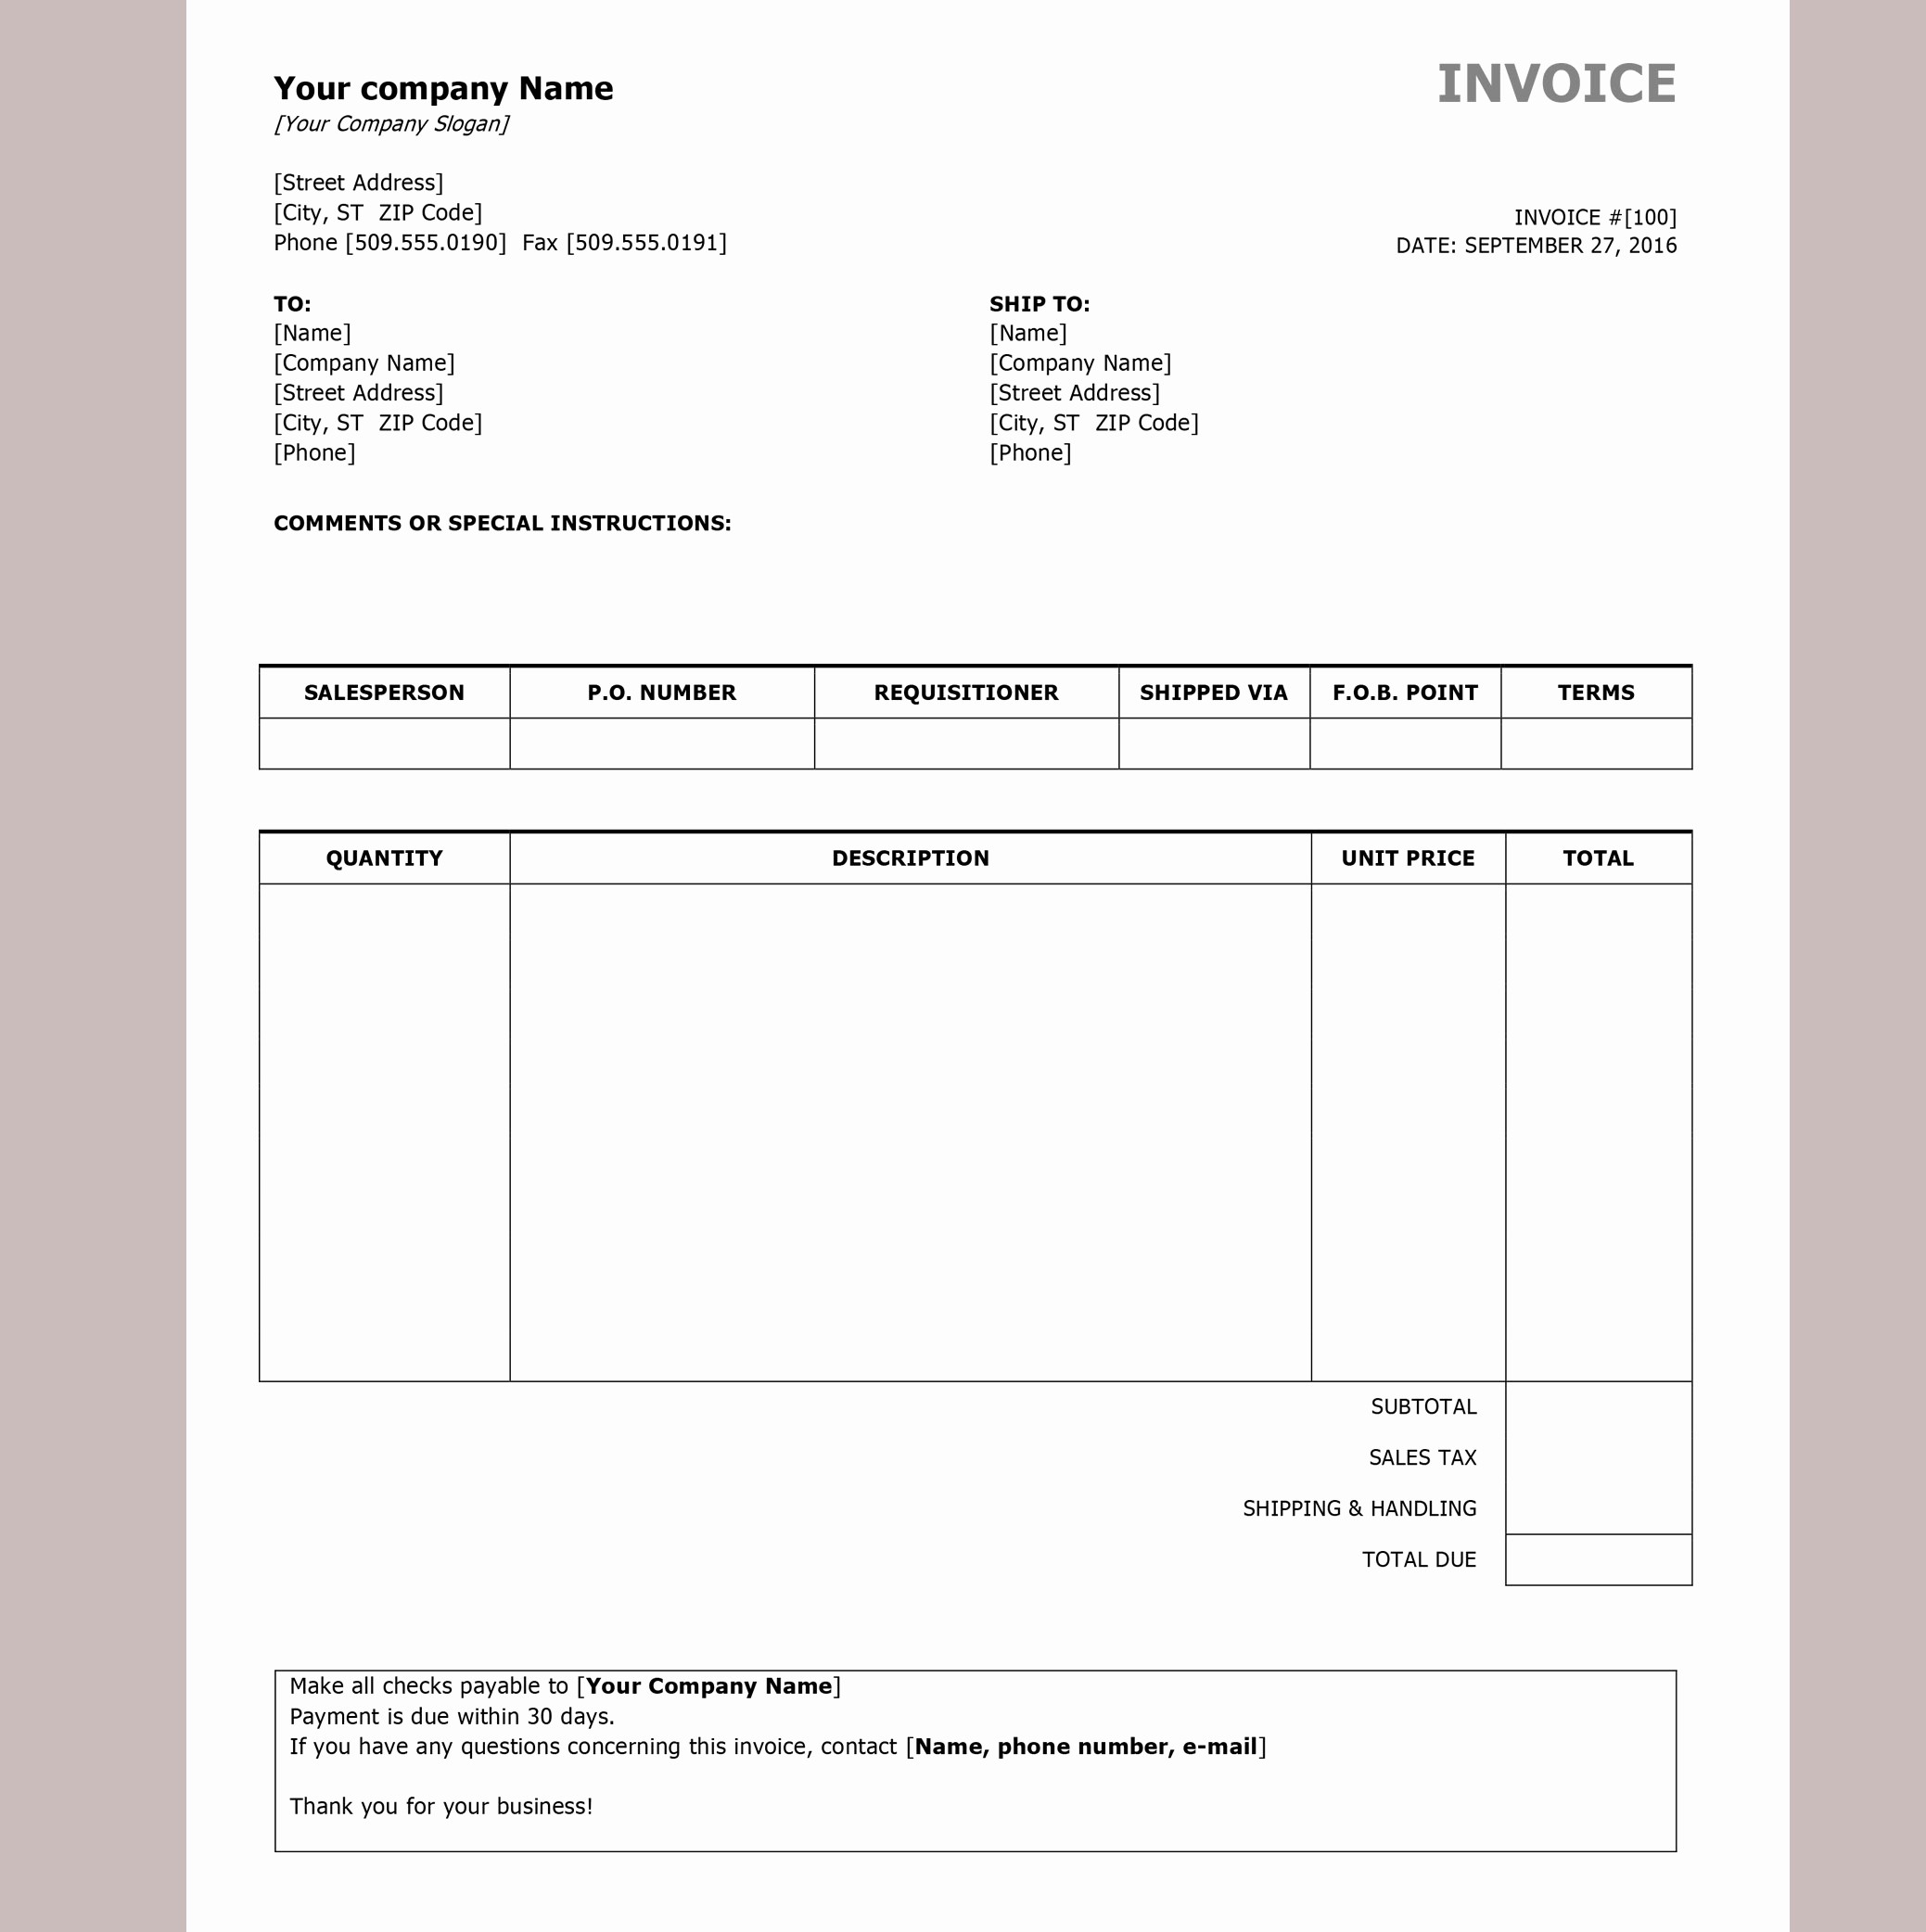 Create Invoice Template In Word Unique Create An Invoice In Microsoft Word